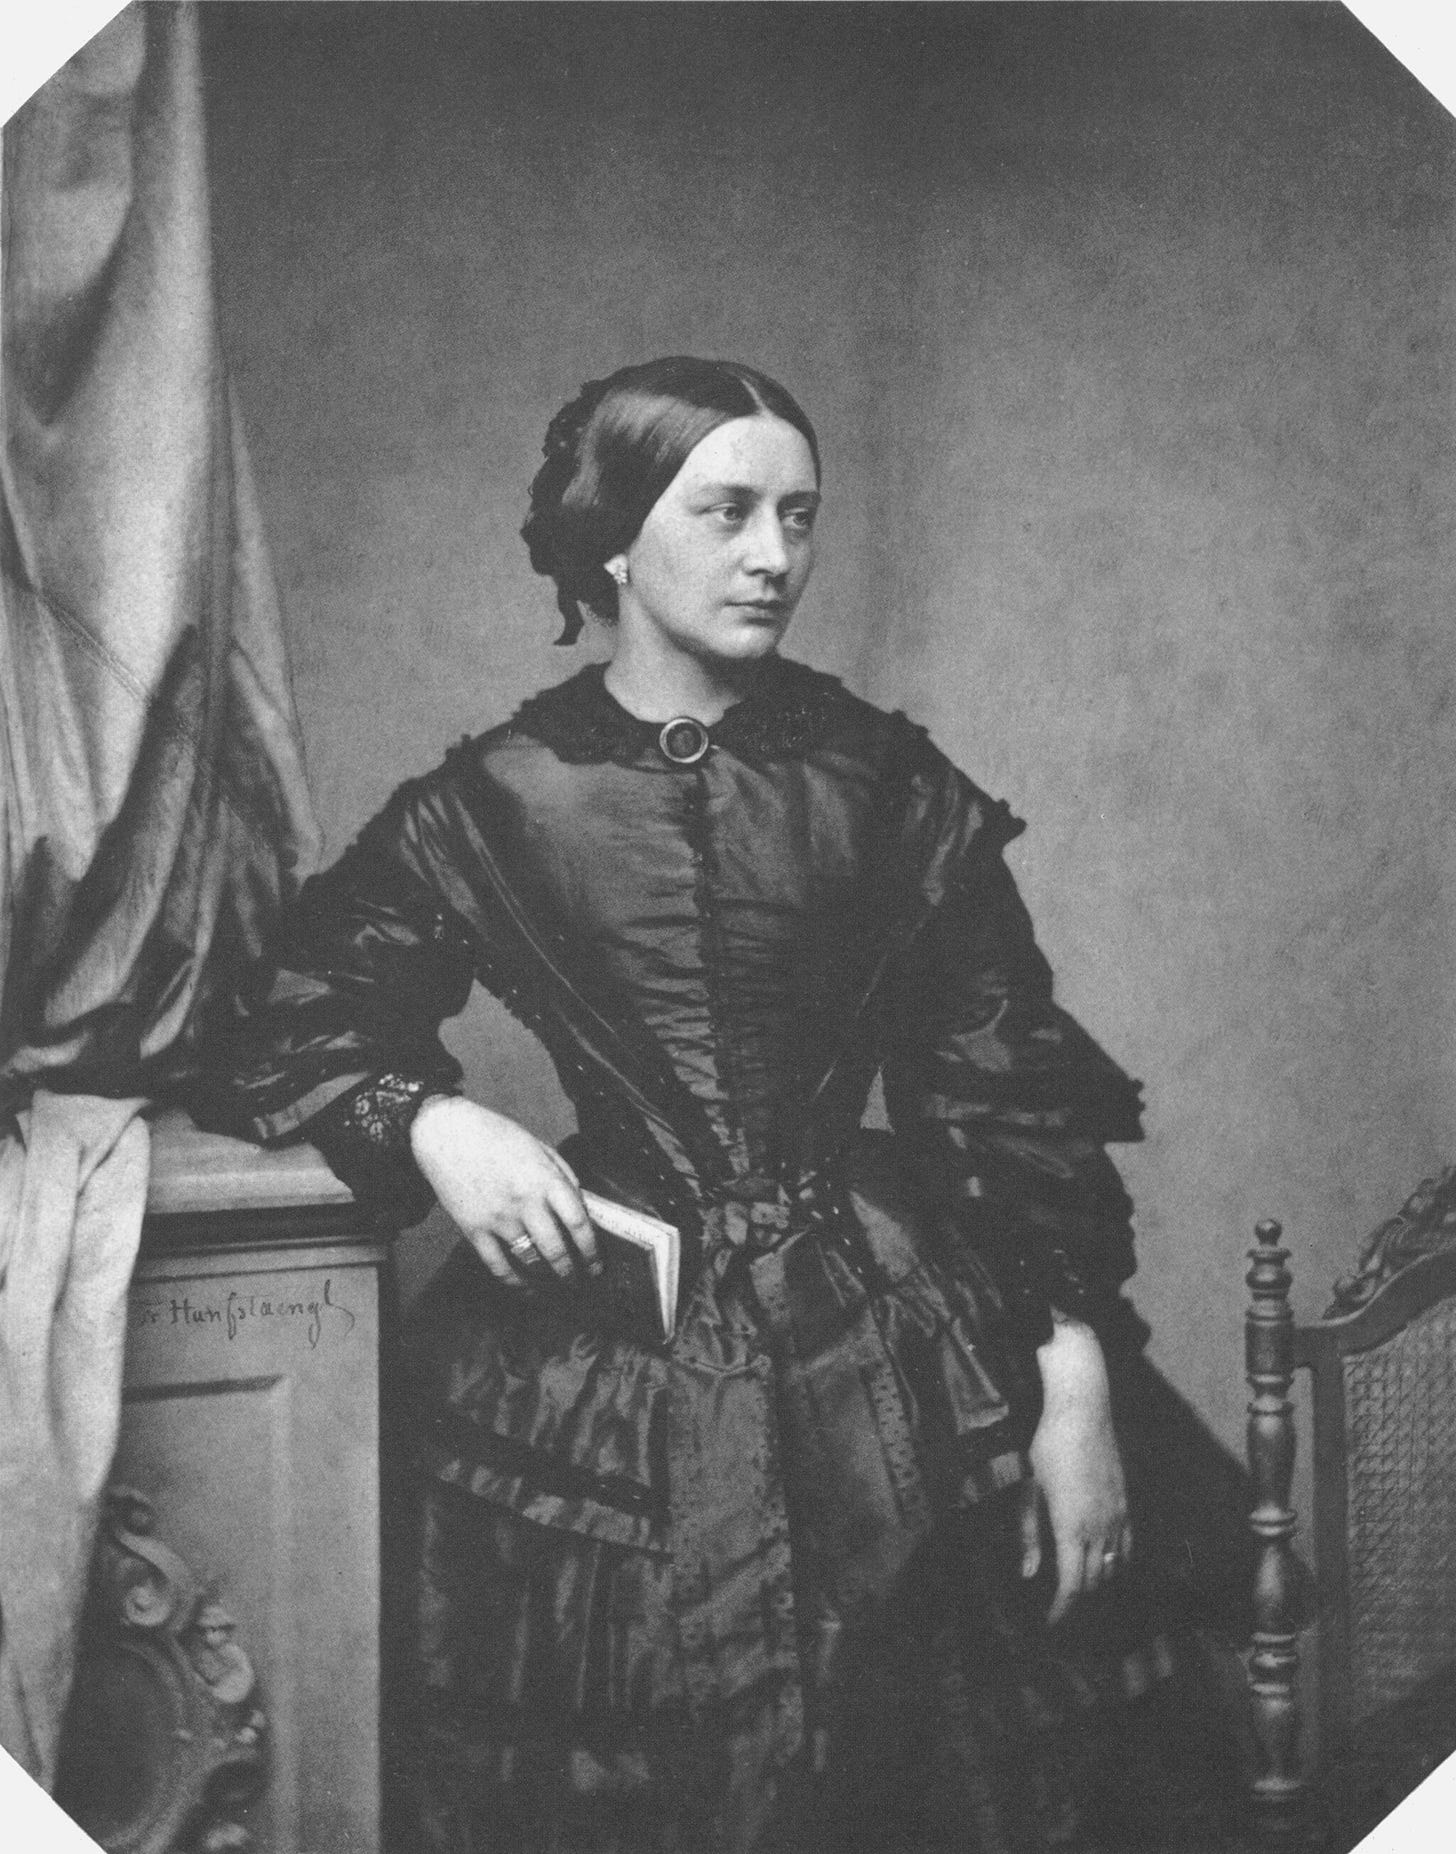 Black and white photo of Clara Schumann in her 30s, wearing an ornate black gown and holding a leatherbound book in her right hand as she poses against a chest of drawers